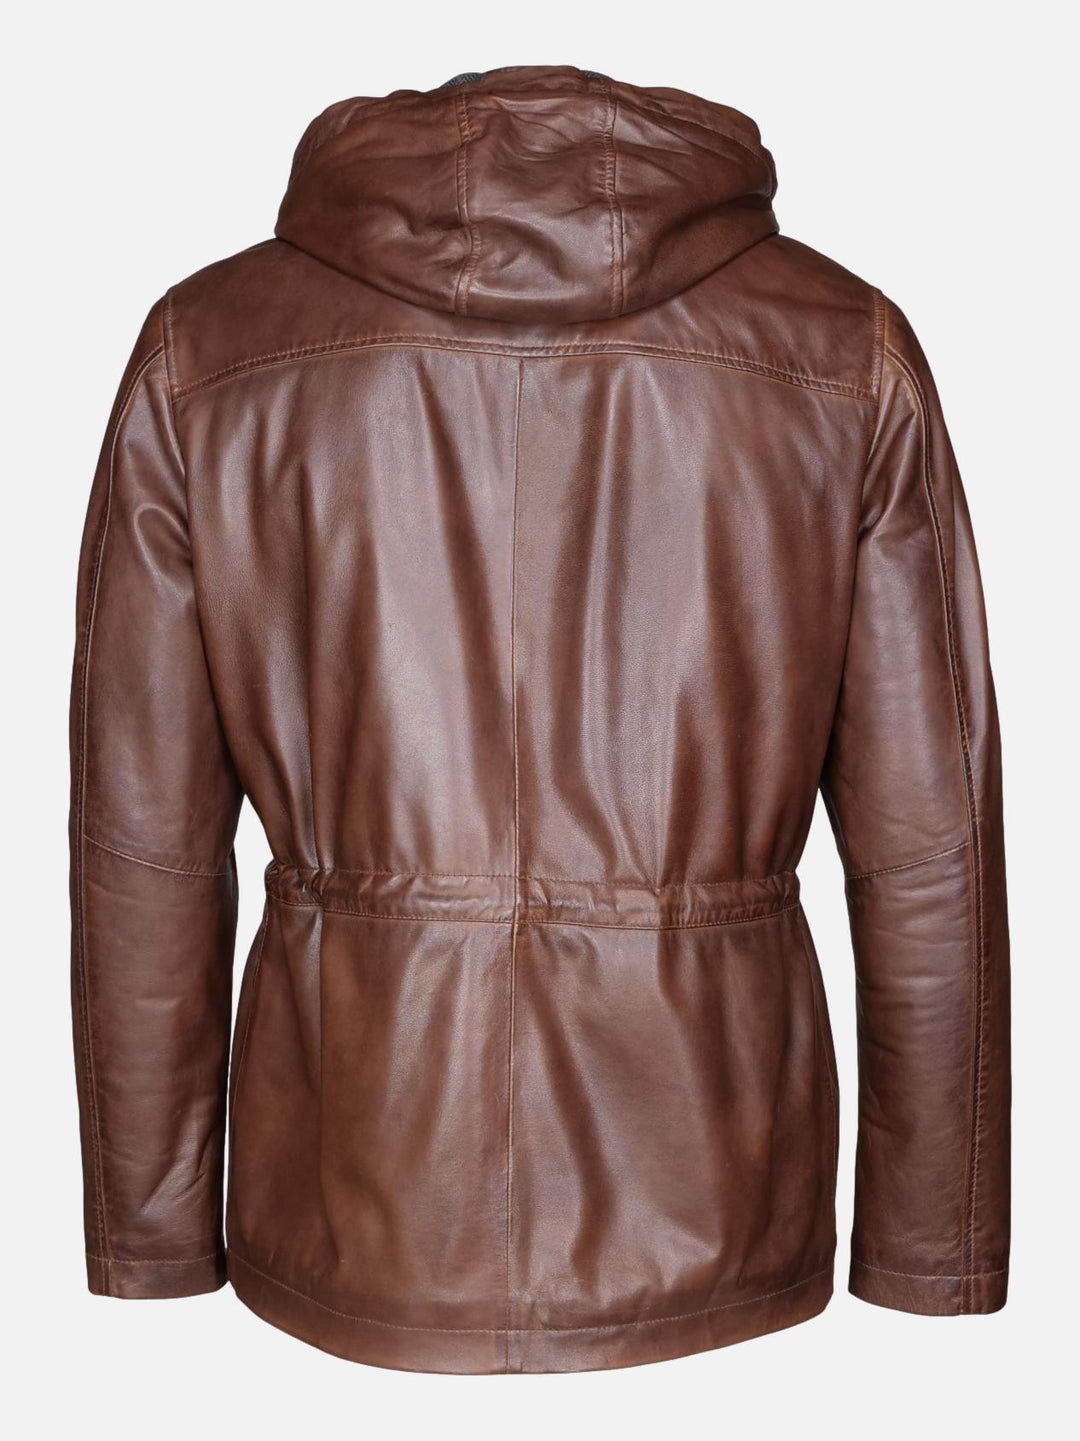 Gassa, 80 cm. - Leather jacket with hood - Man - Copper Brown